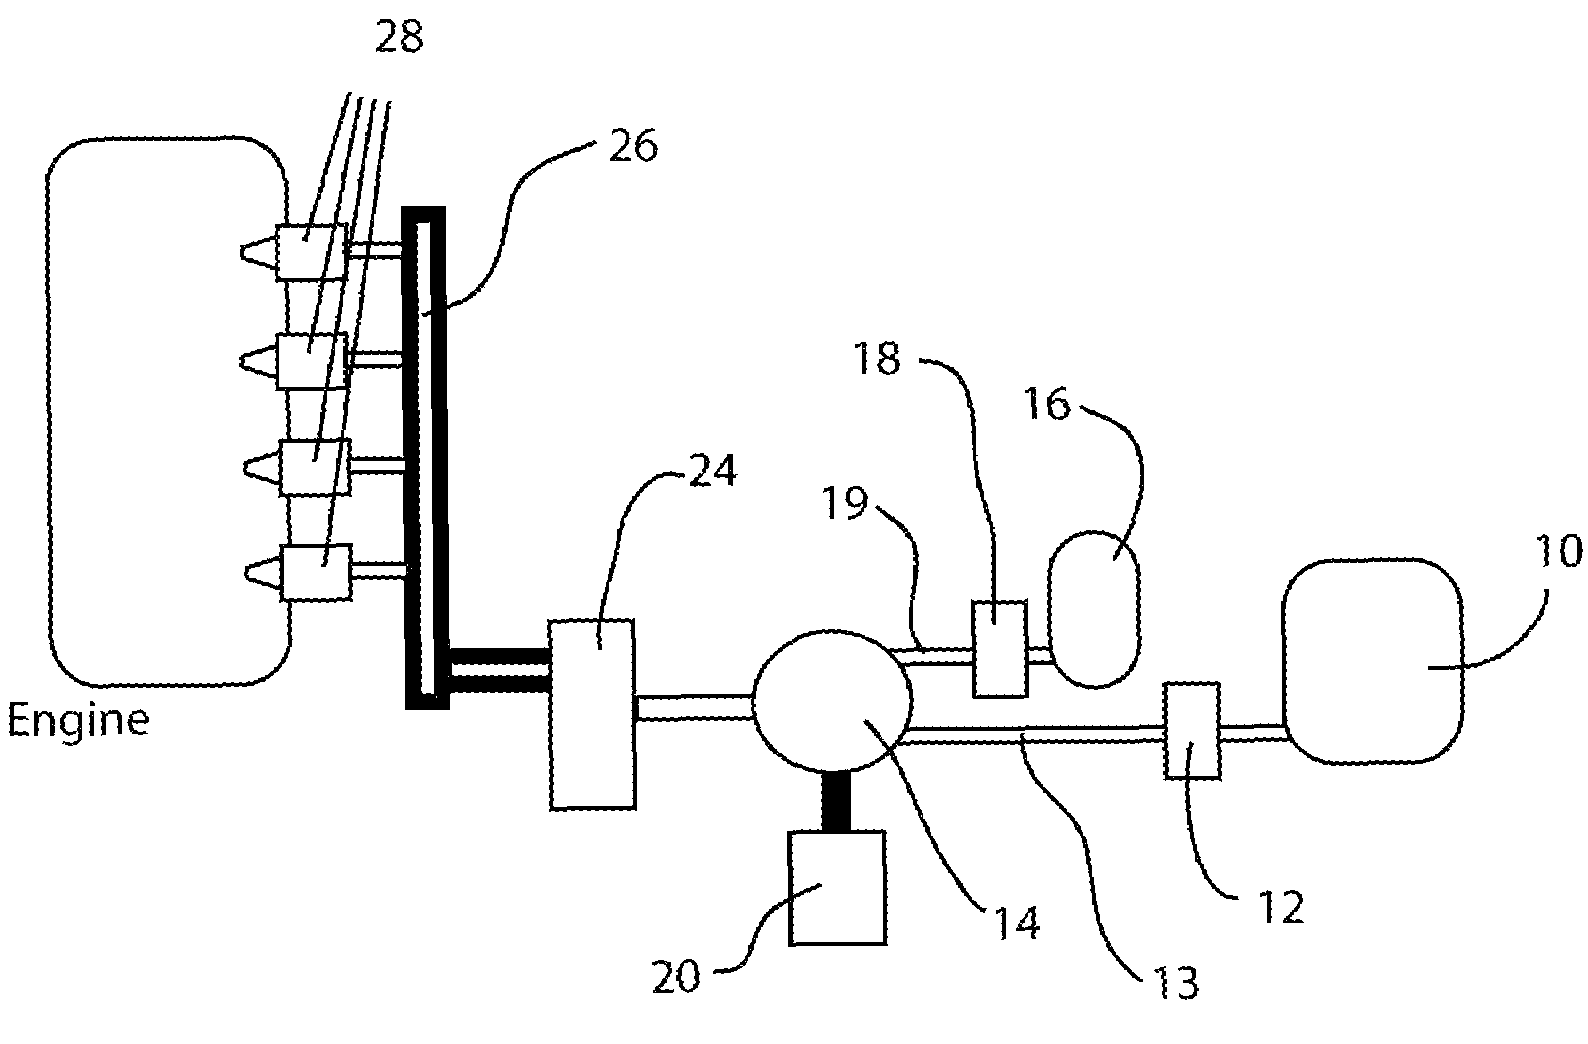 Single nozzle injection of gasoline and anti-knock fuel